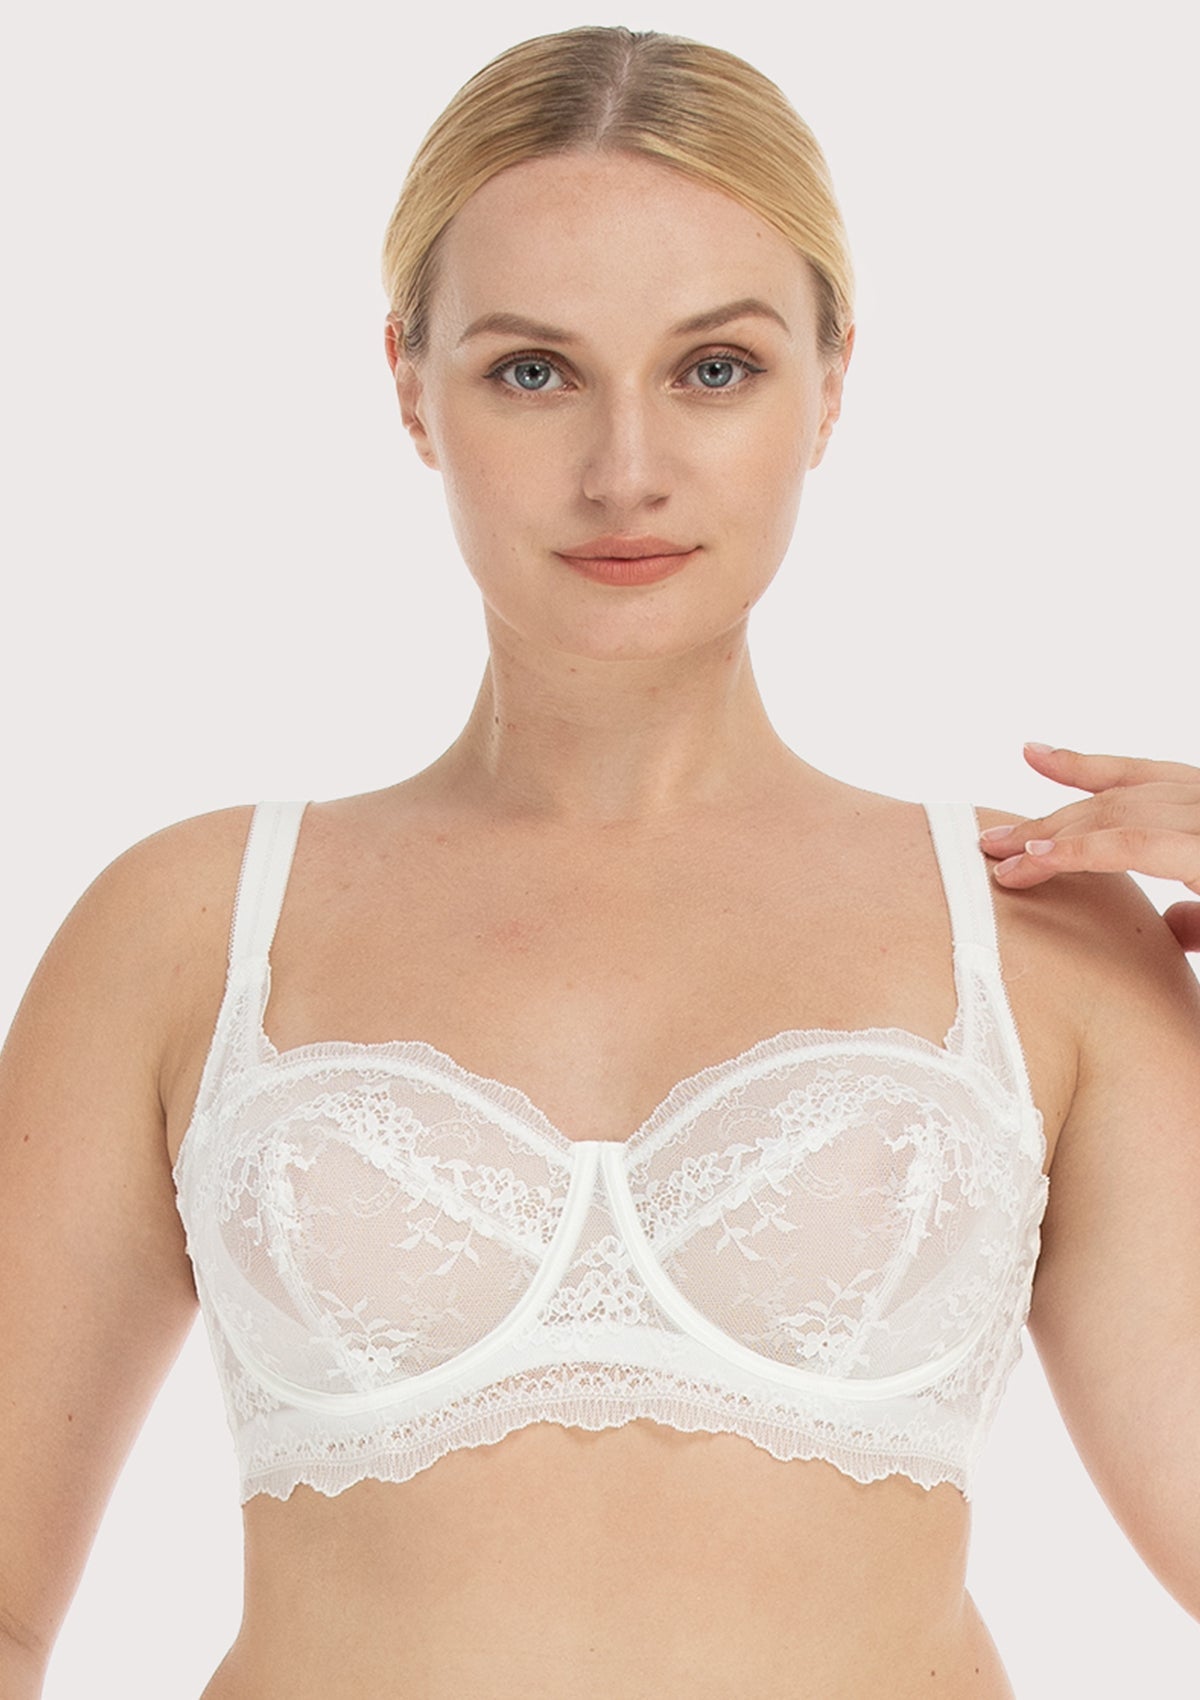 HSIA I Do Floral Lace Bridal Balconette Beautiful Bra For Special Day - Pink / 34 / C